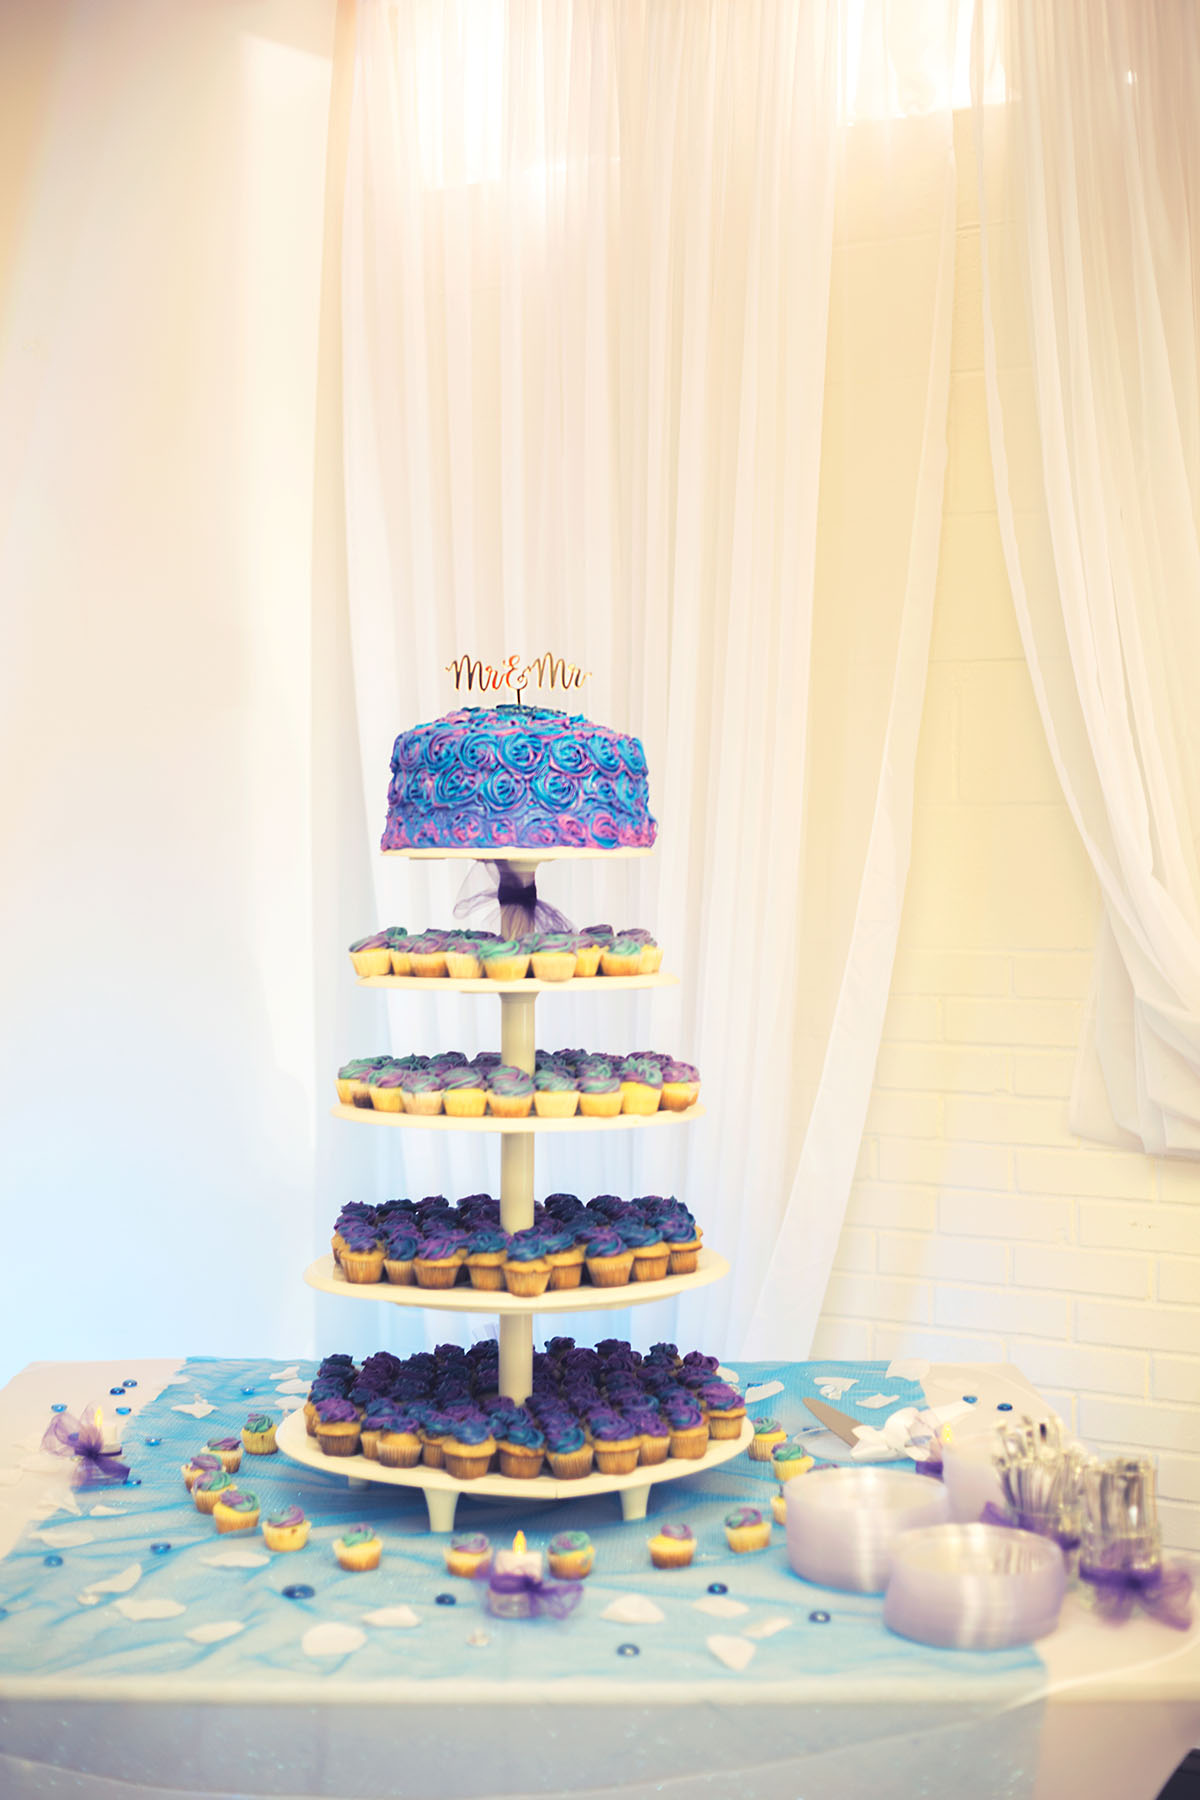 Simple, classy Georgia wedding with amethyst and aquamarine colors wedding cake and cupcakes mr. and mr.